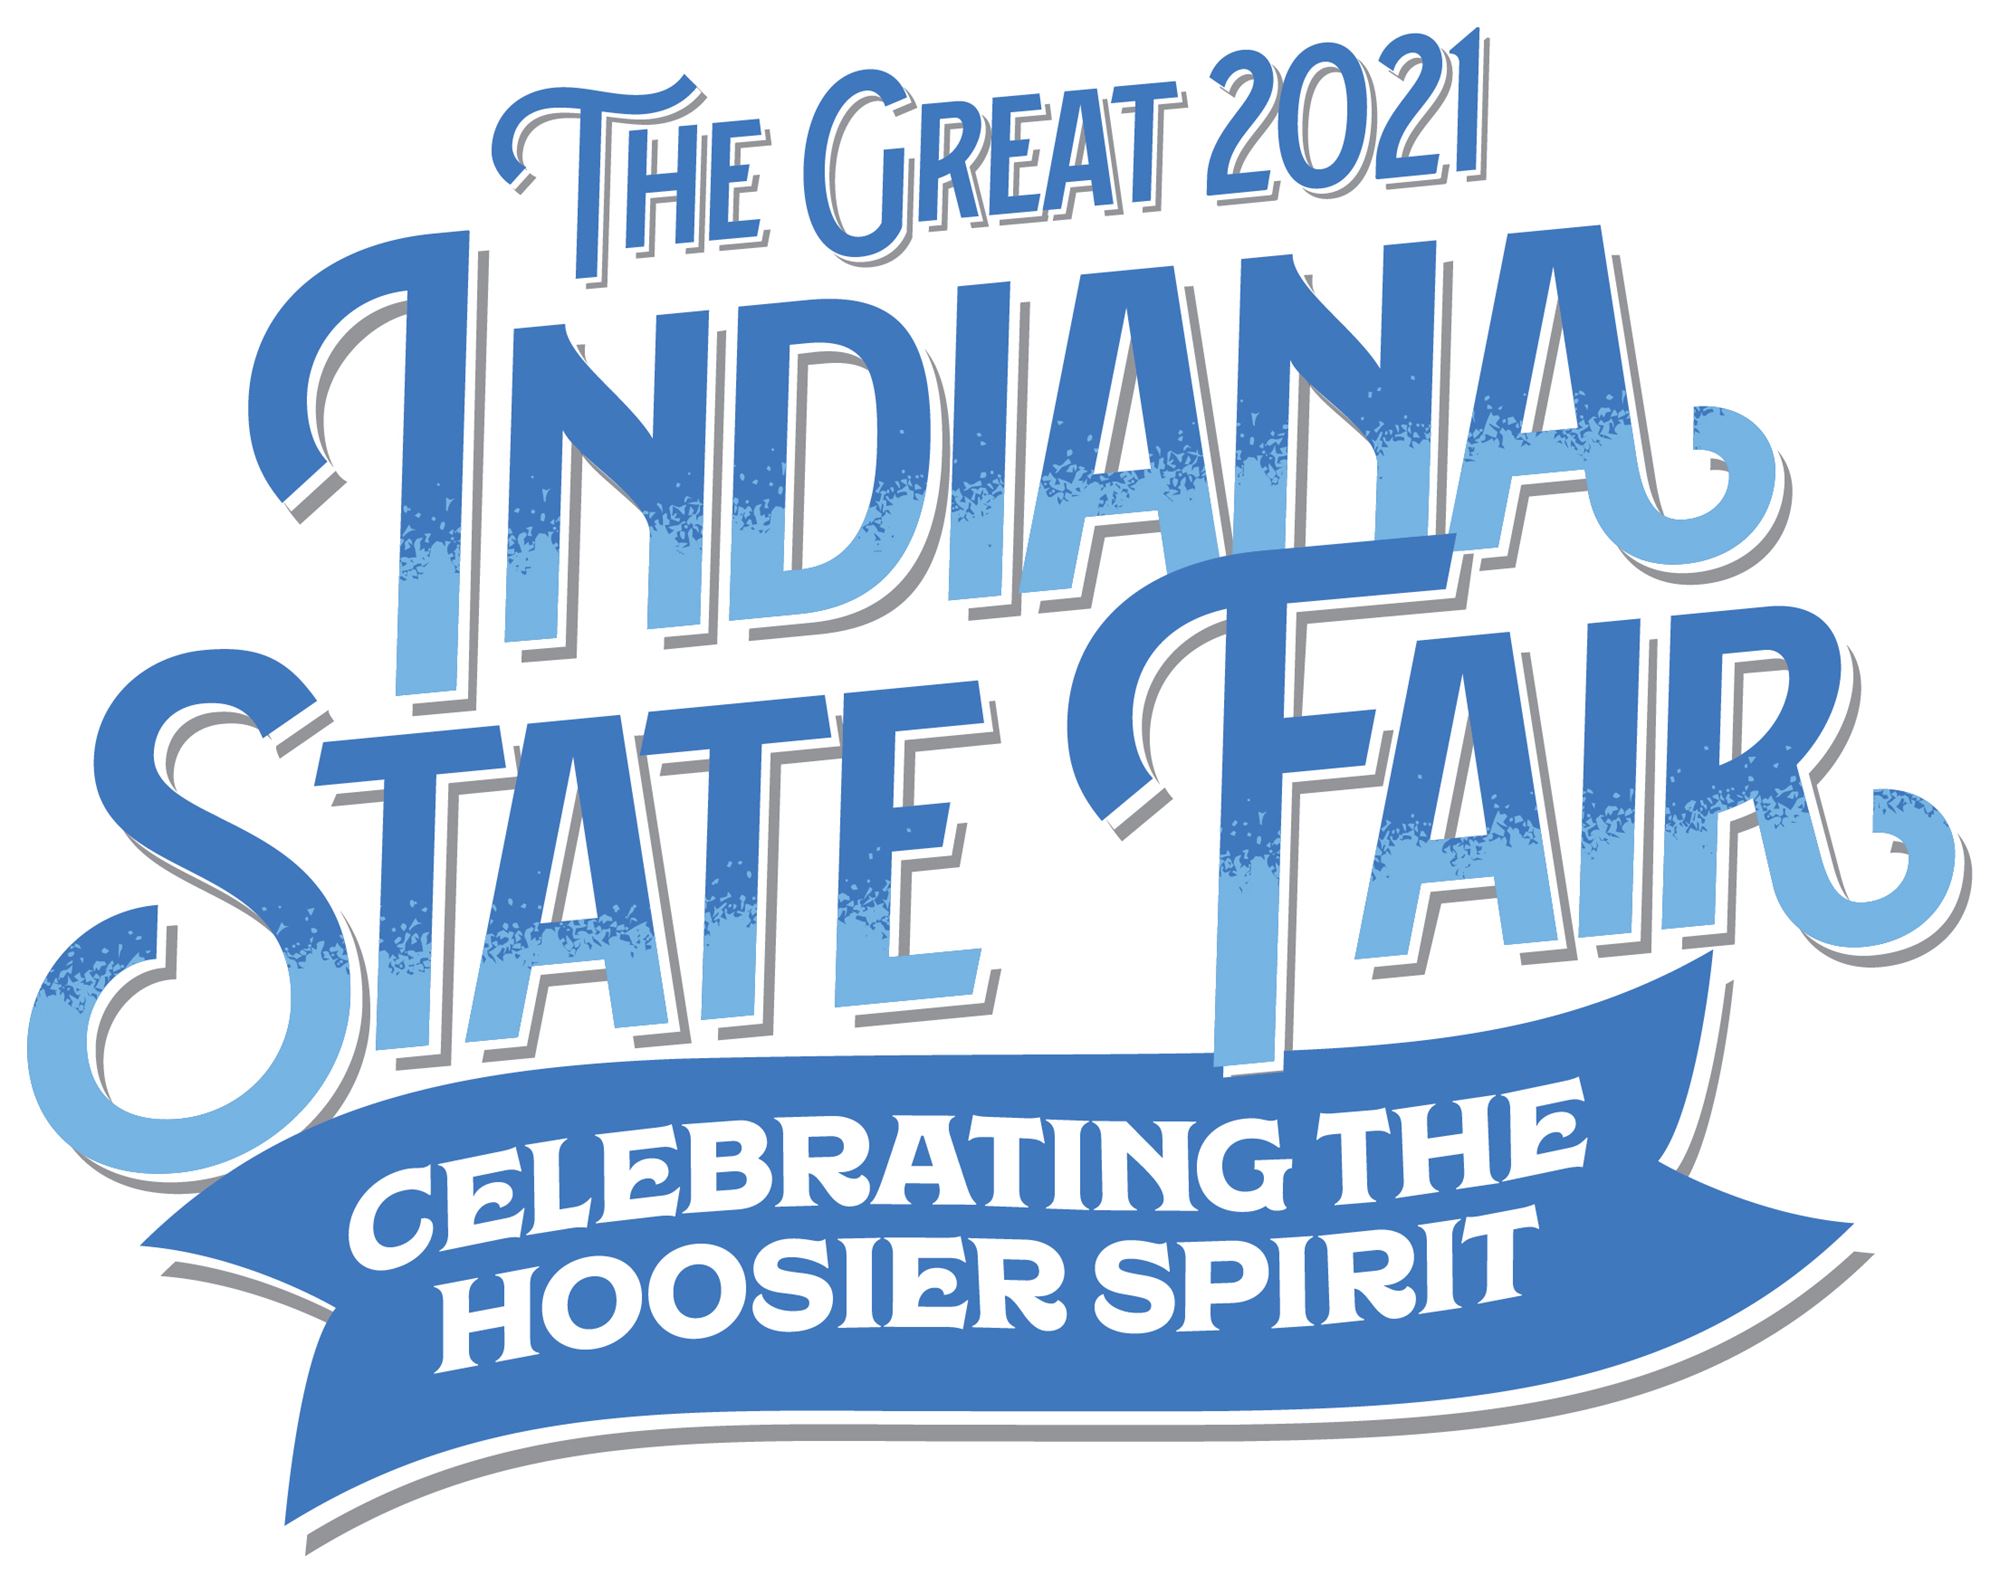 Press Releases Indiana State Fair